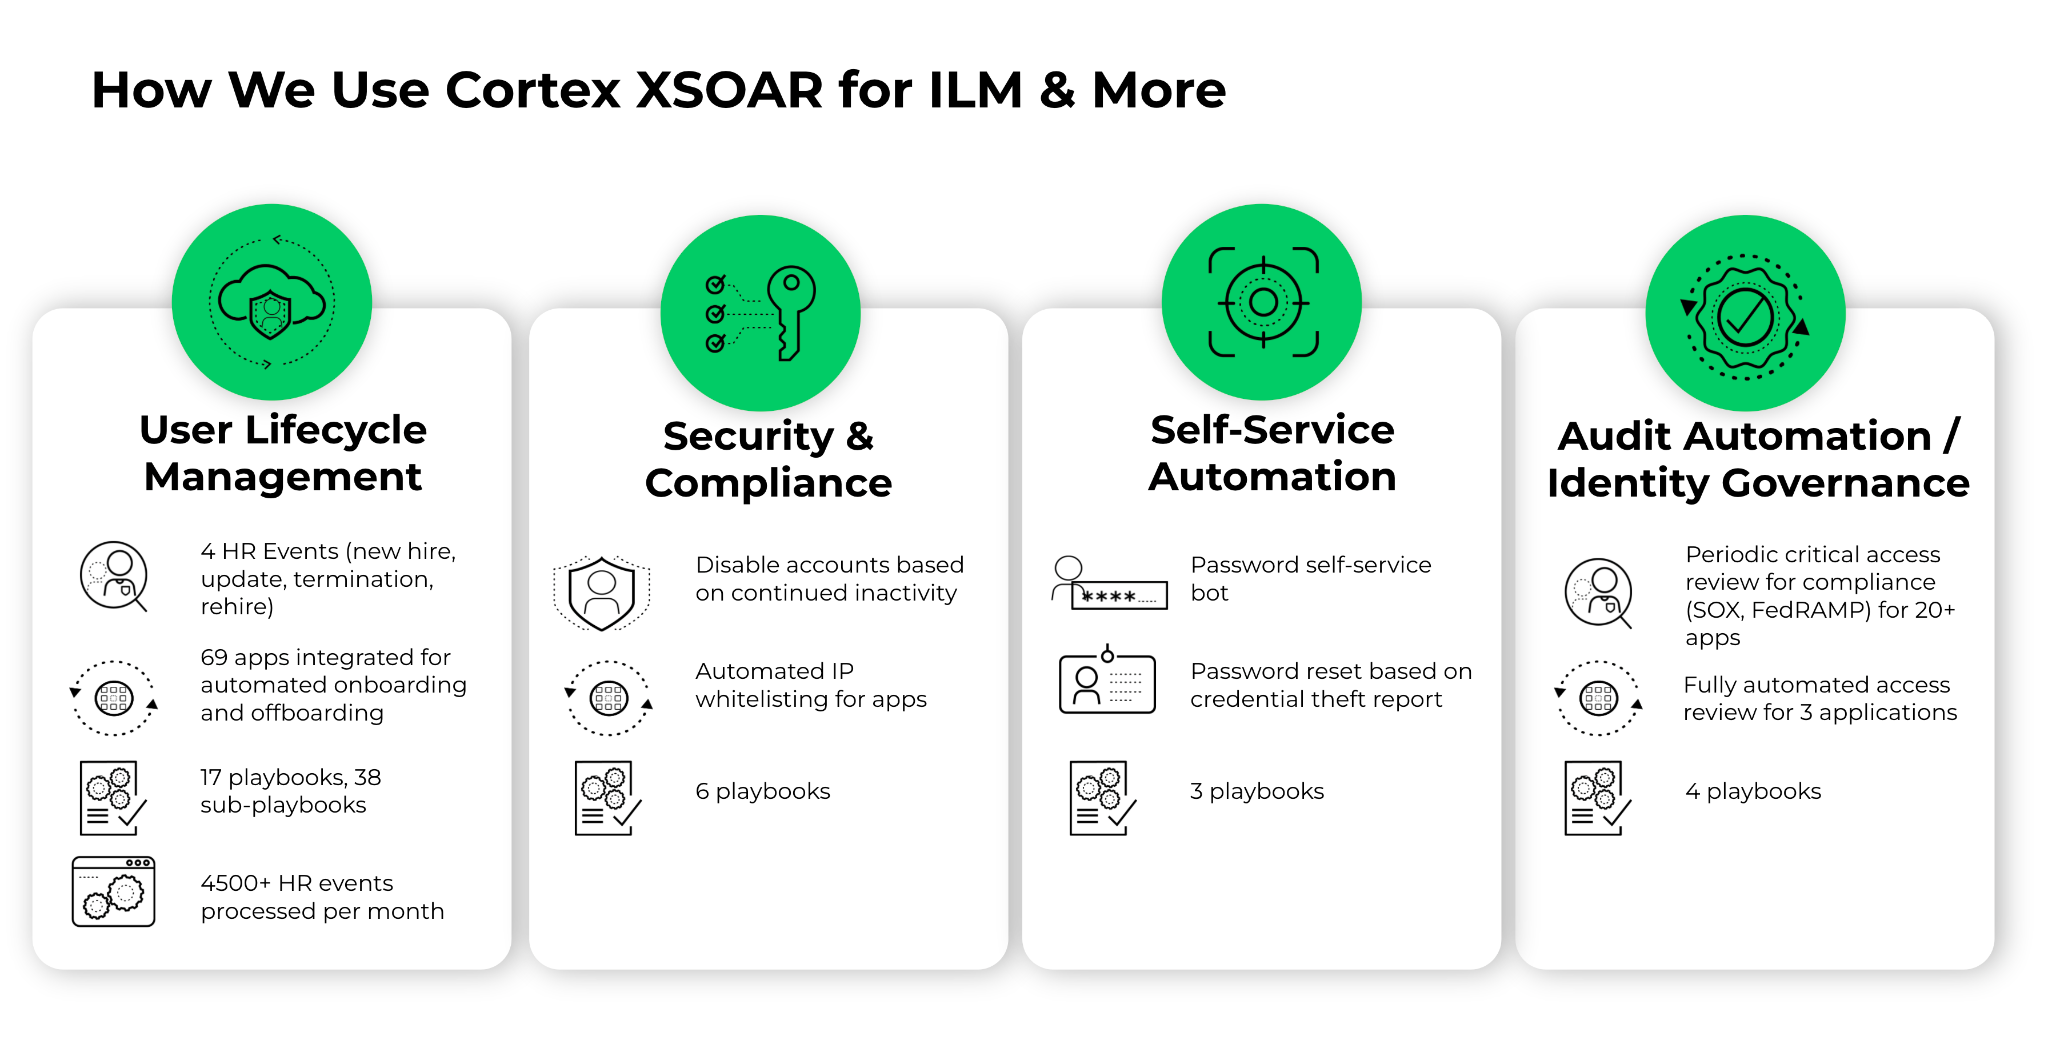 Figure 2: Various uses for Cortex XSOAR for ILM and User Provisioning